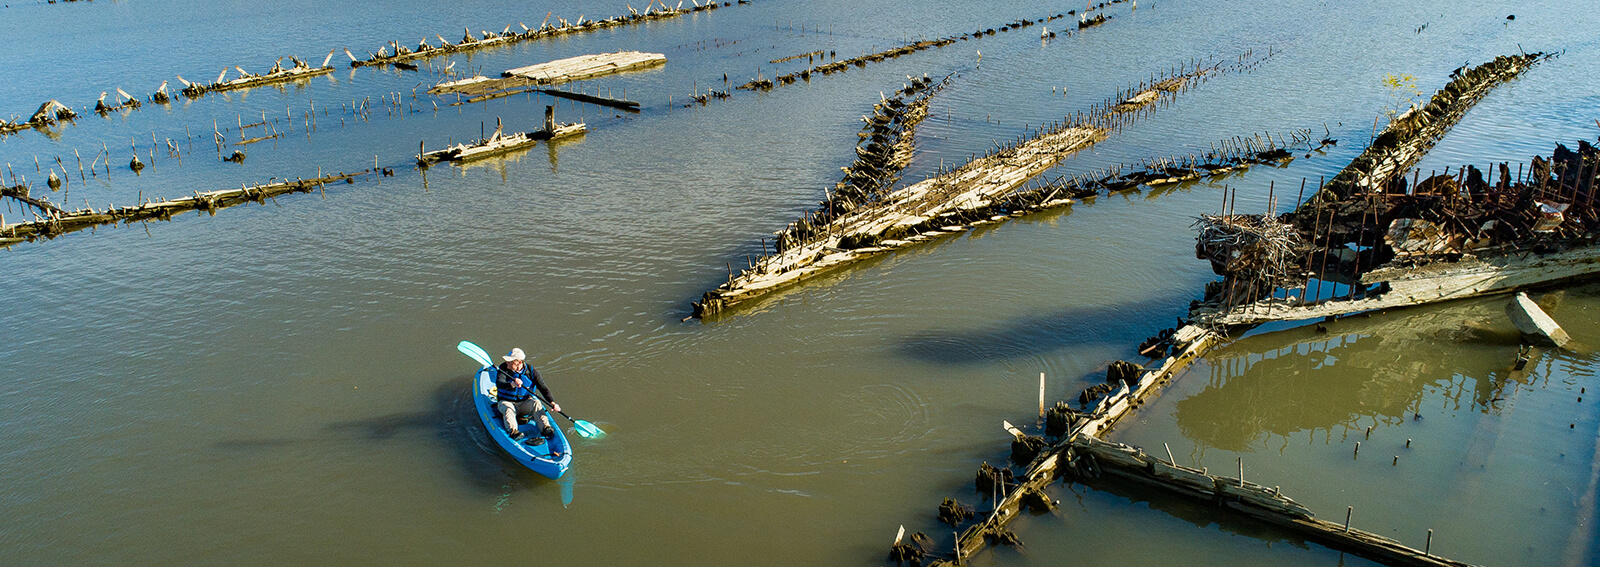 a paddleboarder paddles next to shipwrecks prtruding from the water